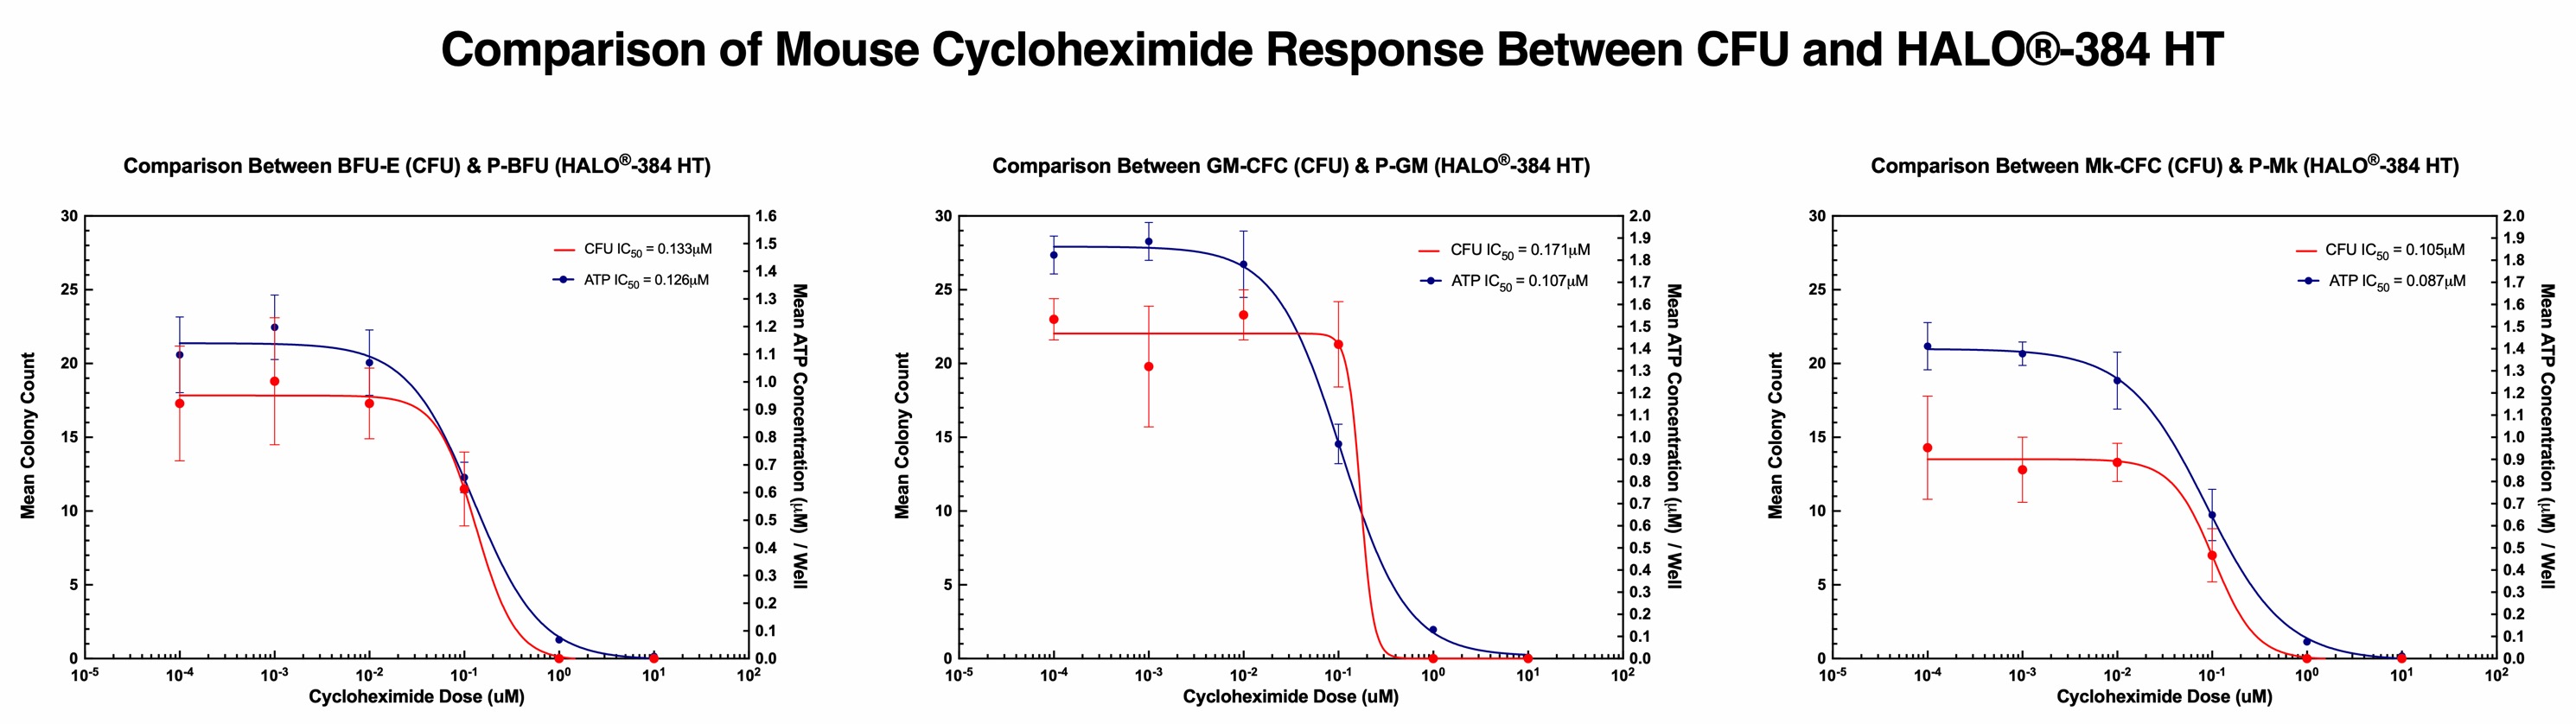 Comparison of CFU and HALO-384 HT Cycloheximide Response for Mouse Bone Marrow